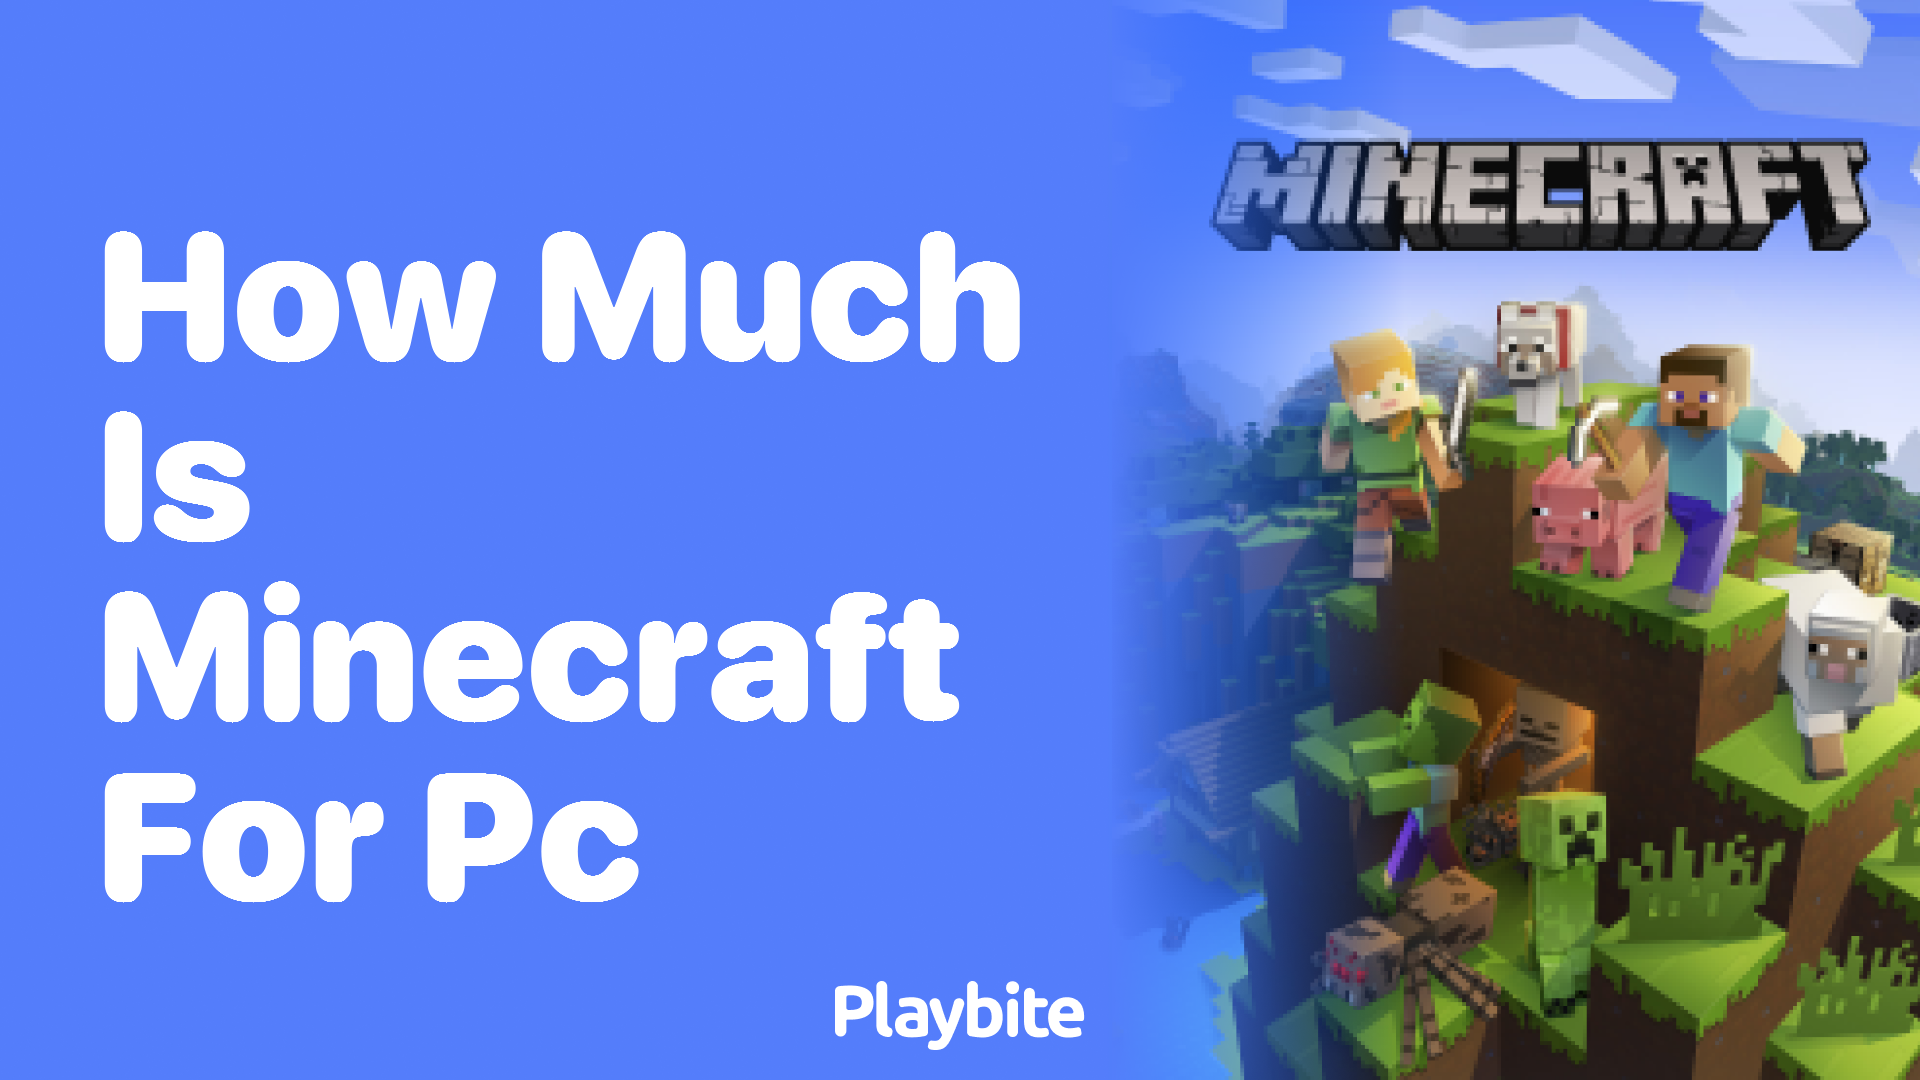 How Much Is Minecraft for PC?